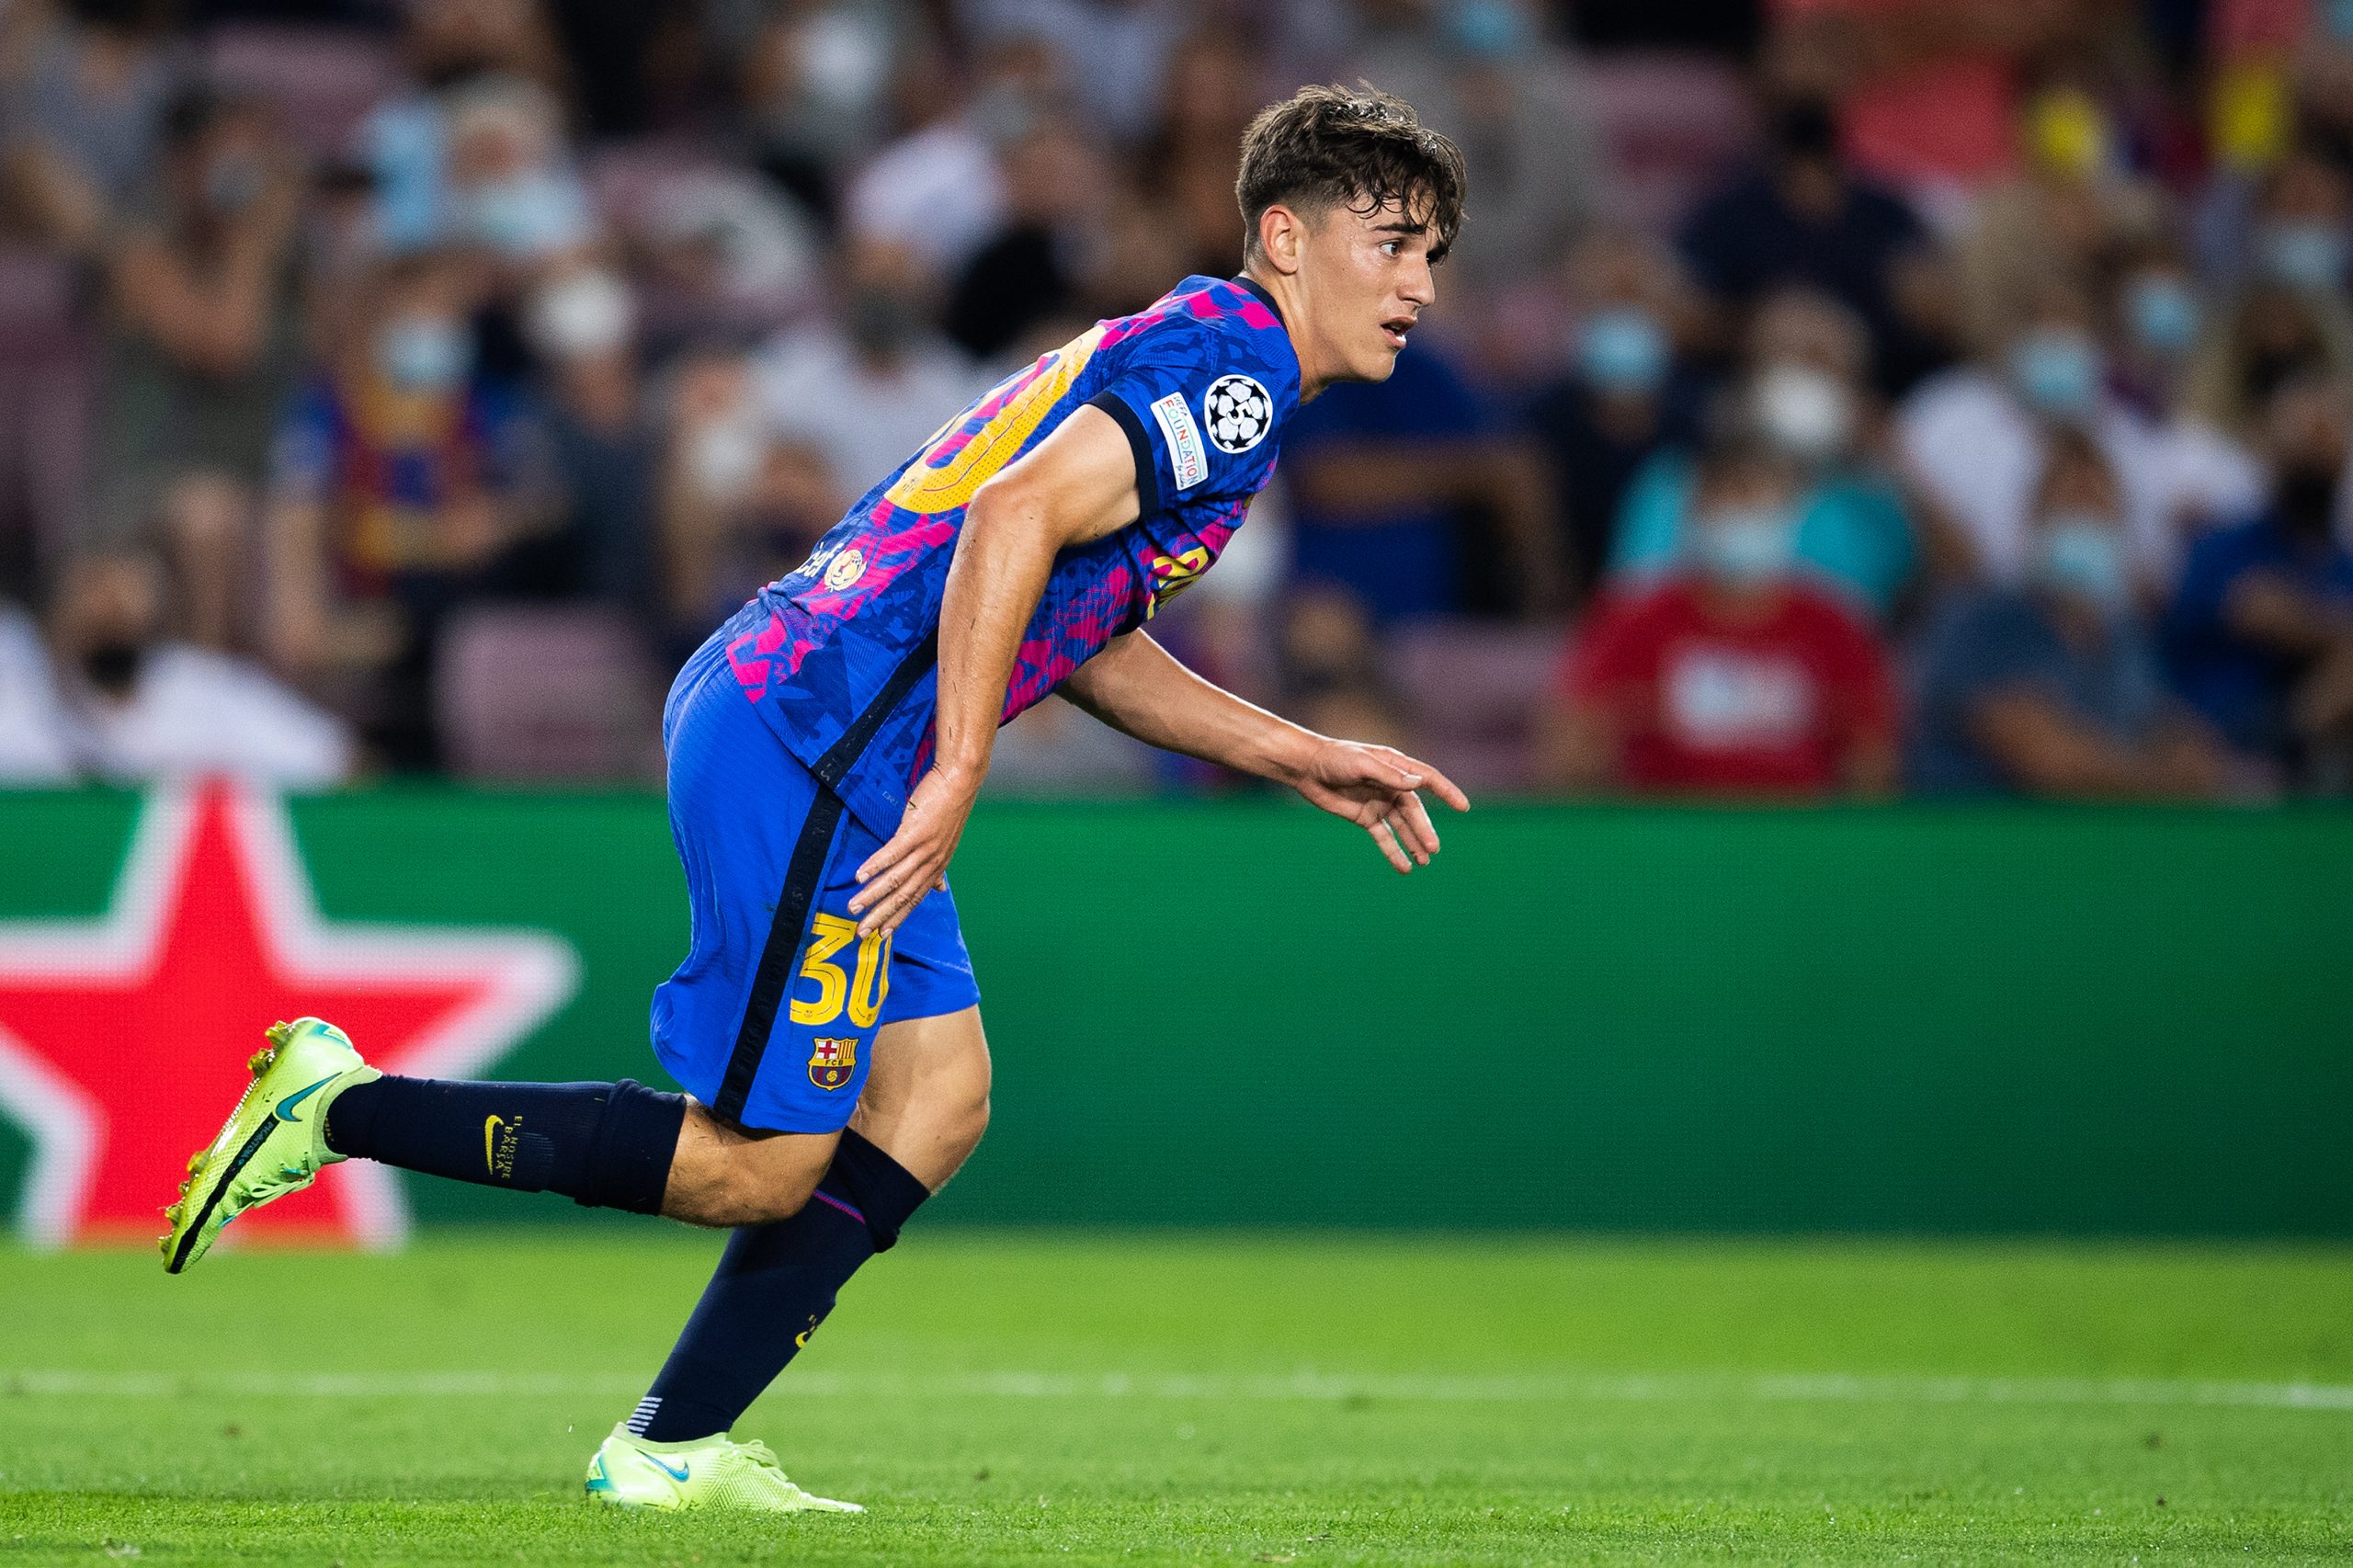 Barcelona prodigy Gavi set to agree new contract amidst interest from Manchester United.